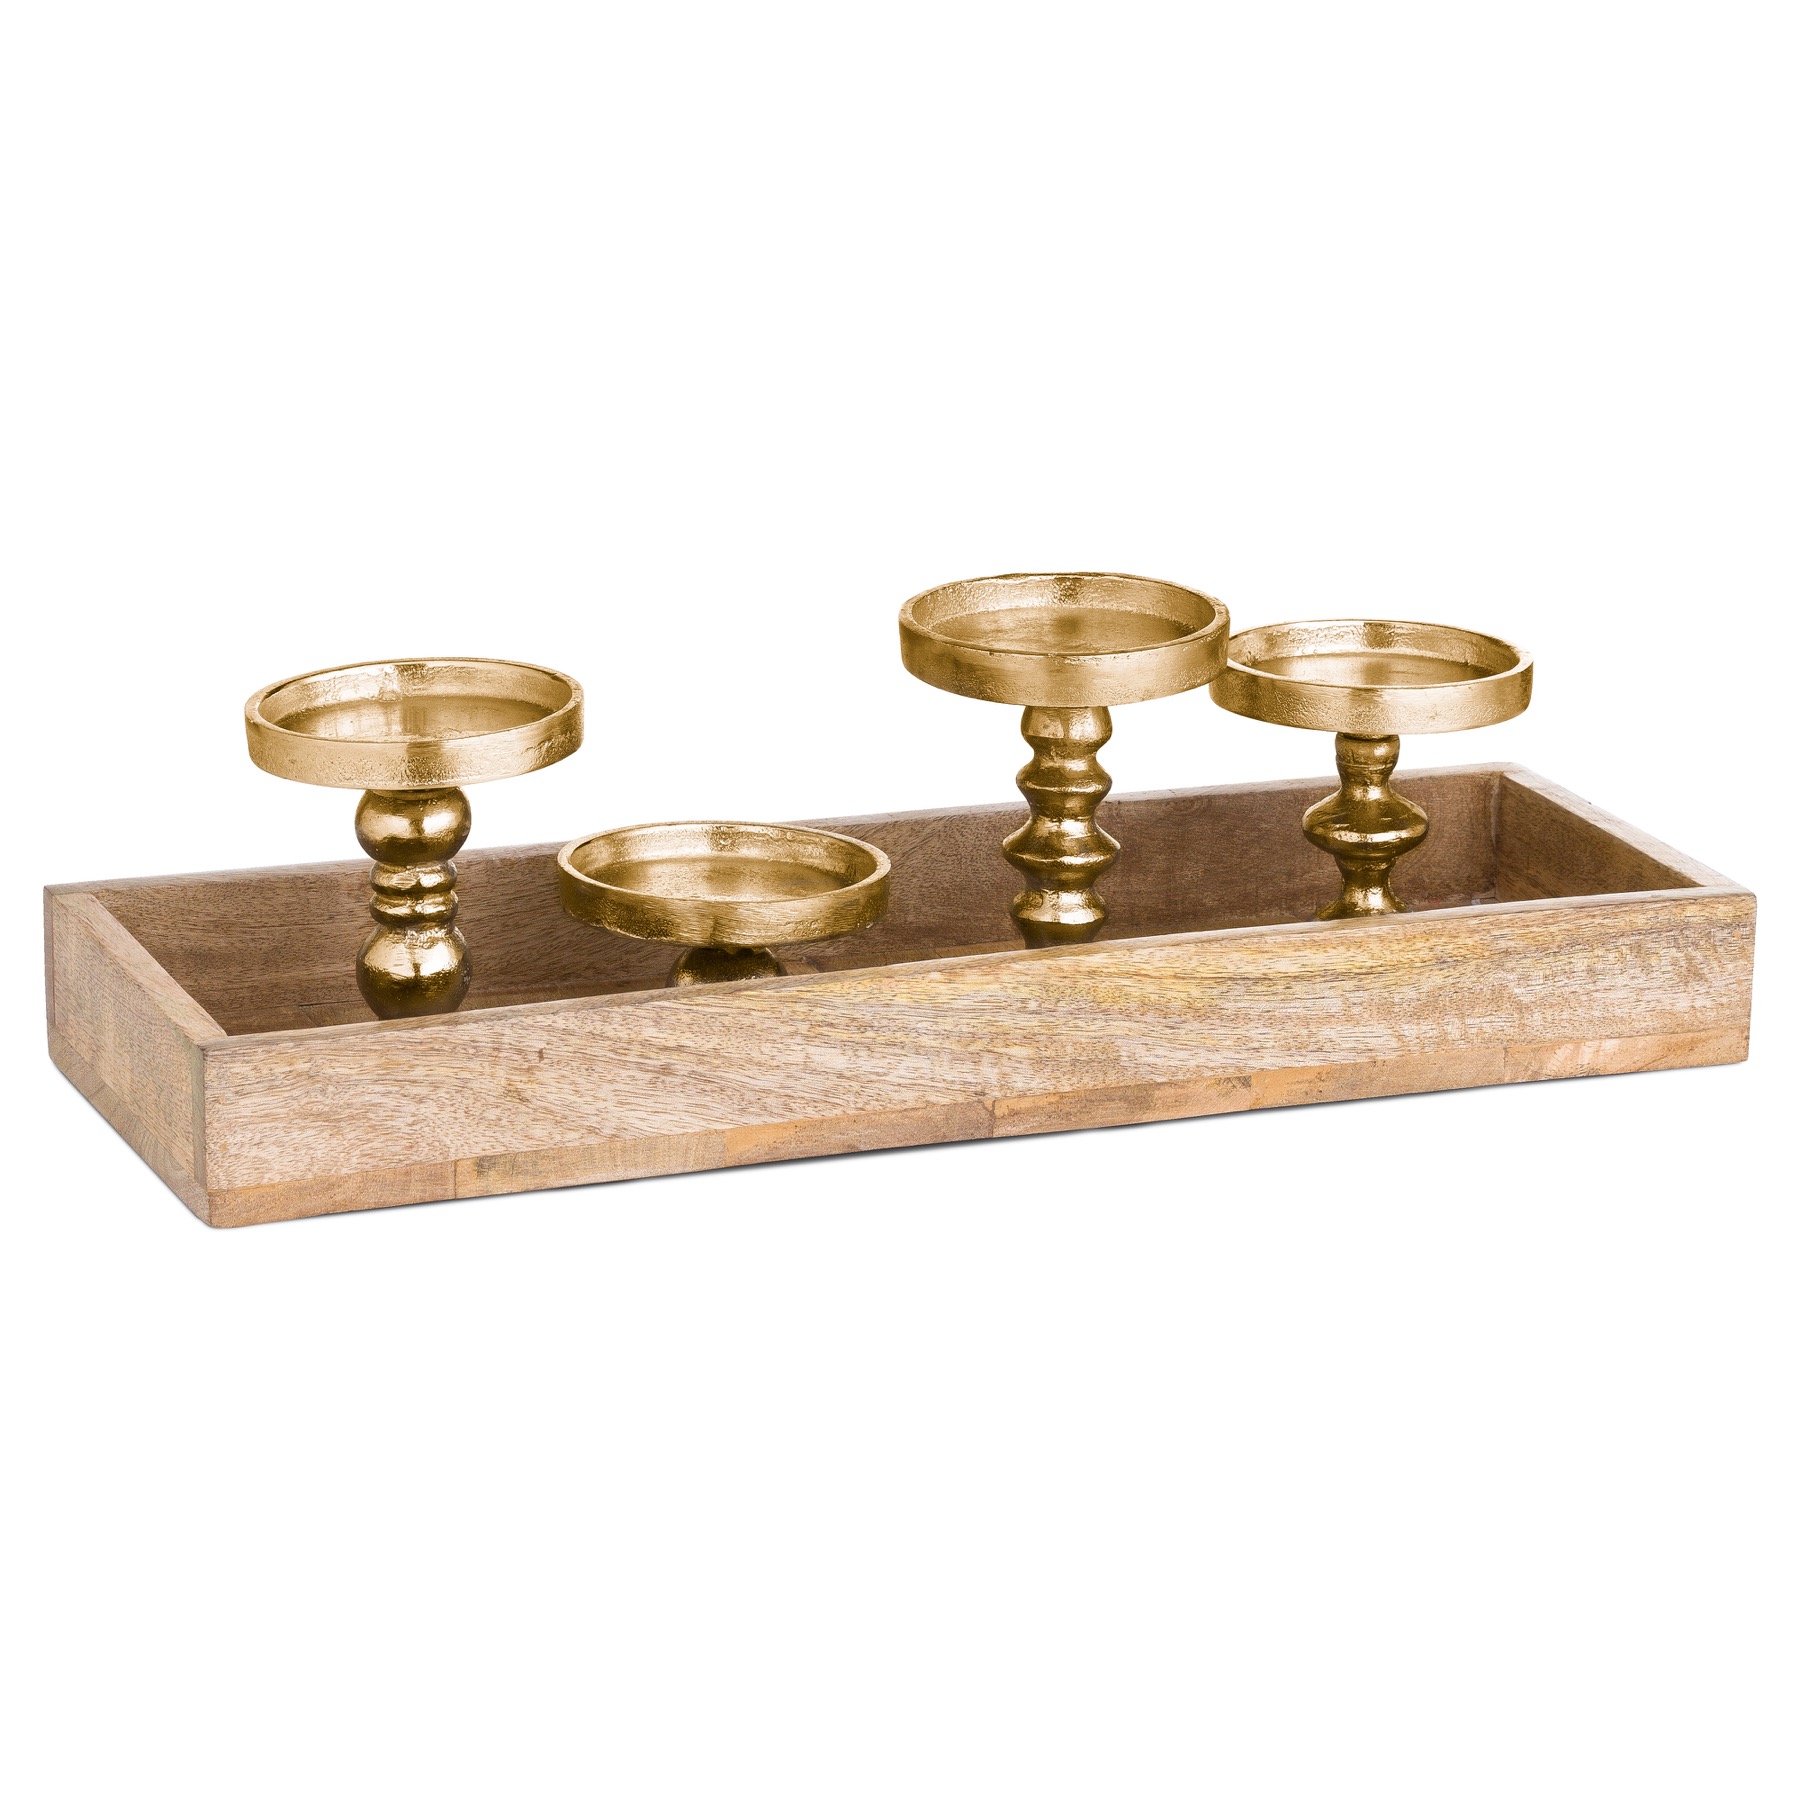 Victoria & Co. Wooden Tray Four Candle Holders